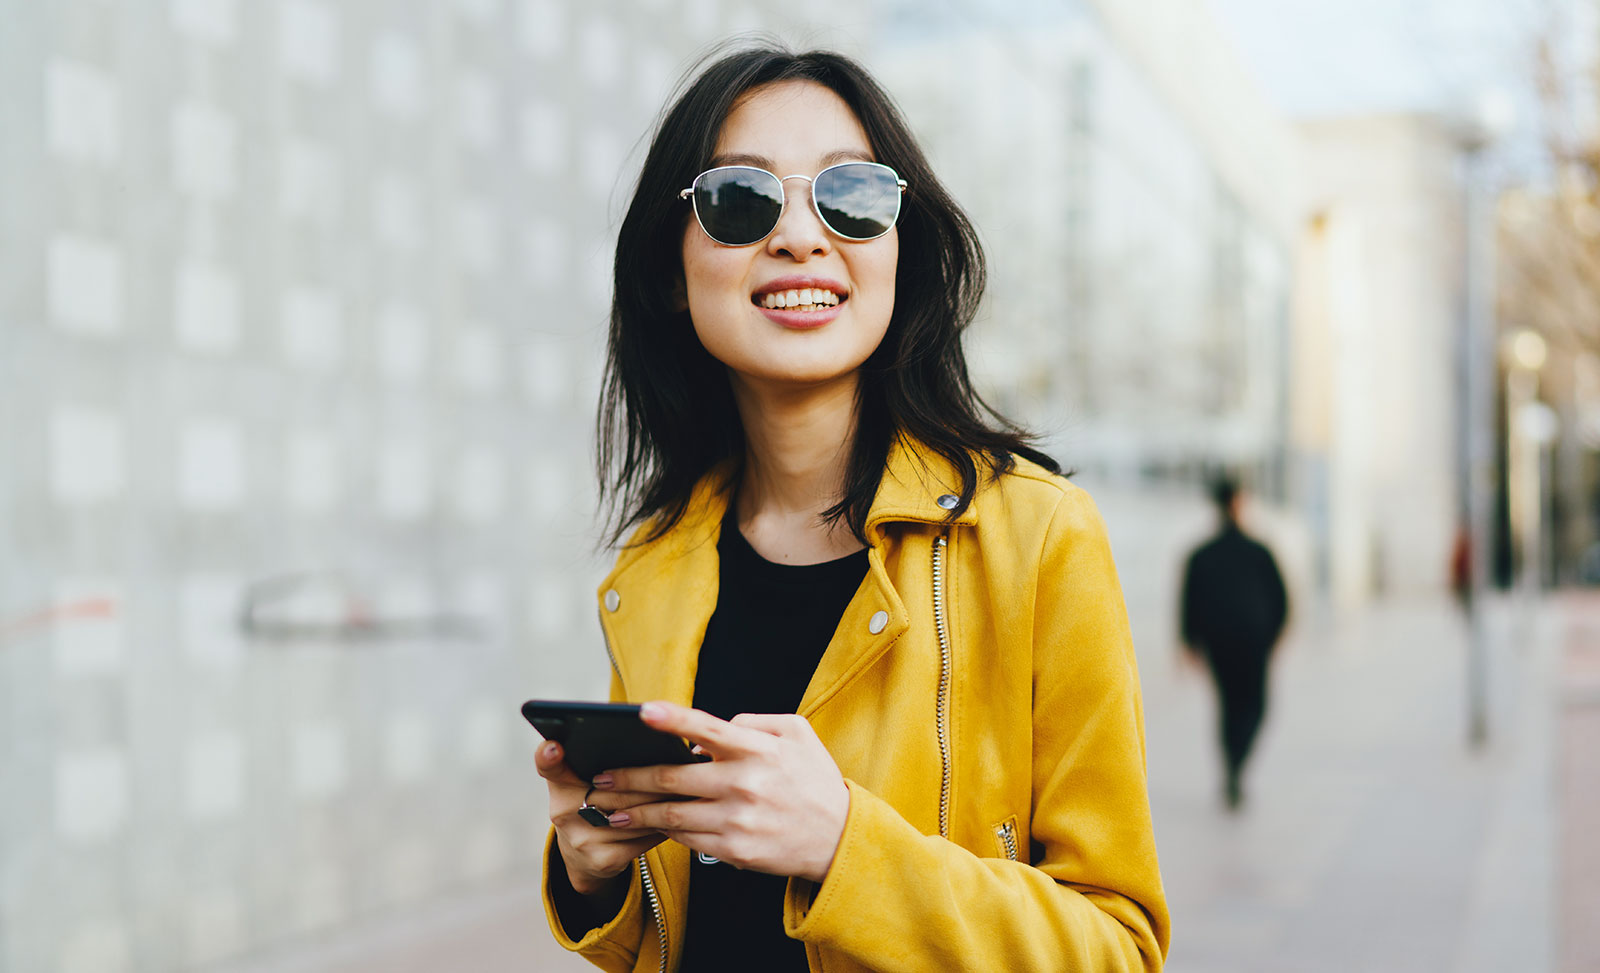 A young woman in sunglasses and yellow leather jacket texting on her phone.